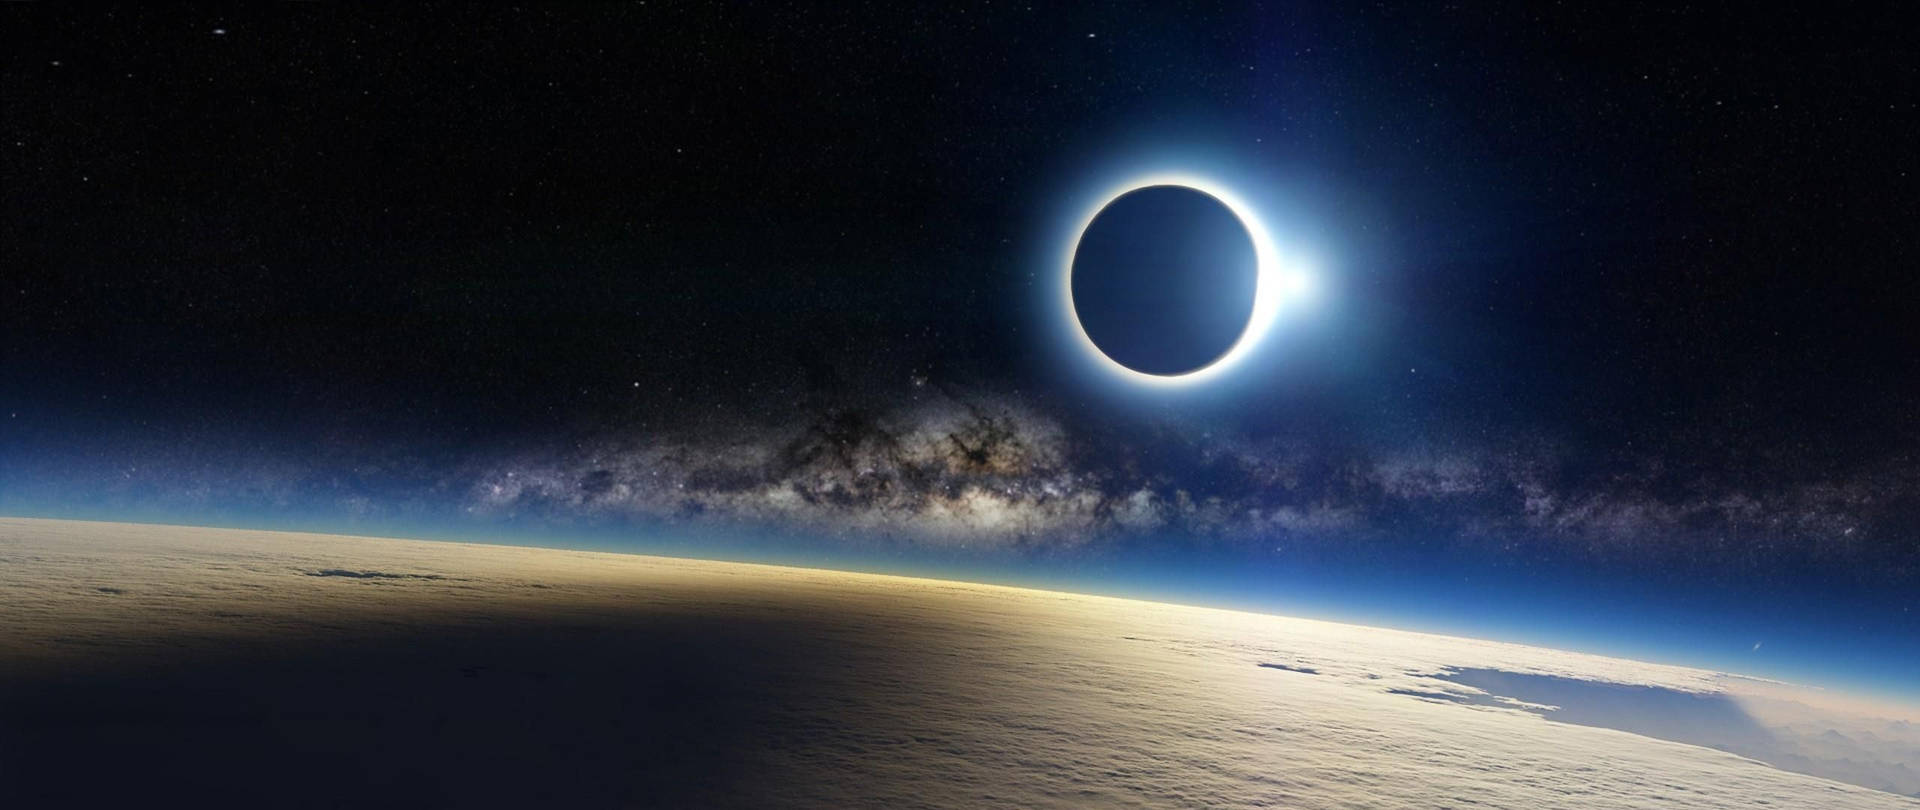 Eclipse In Outer Space wallpaper.